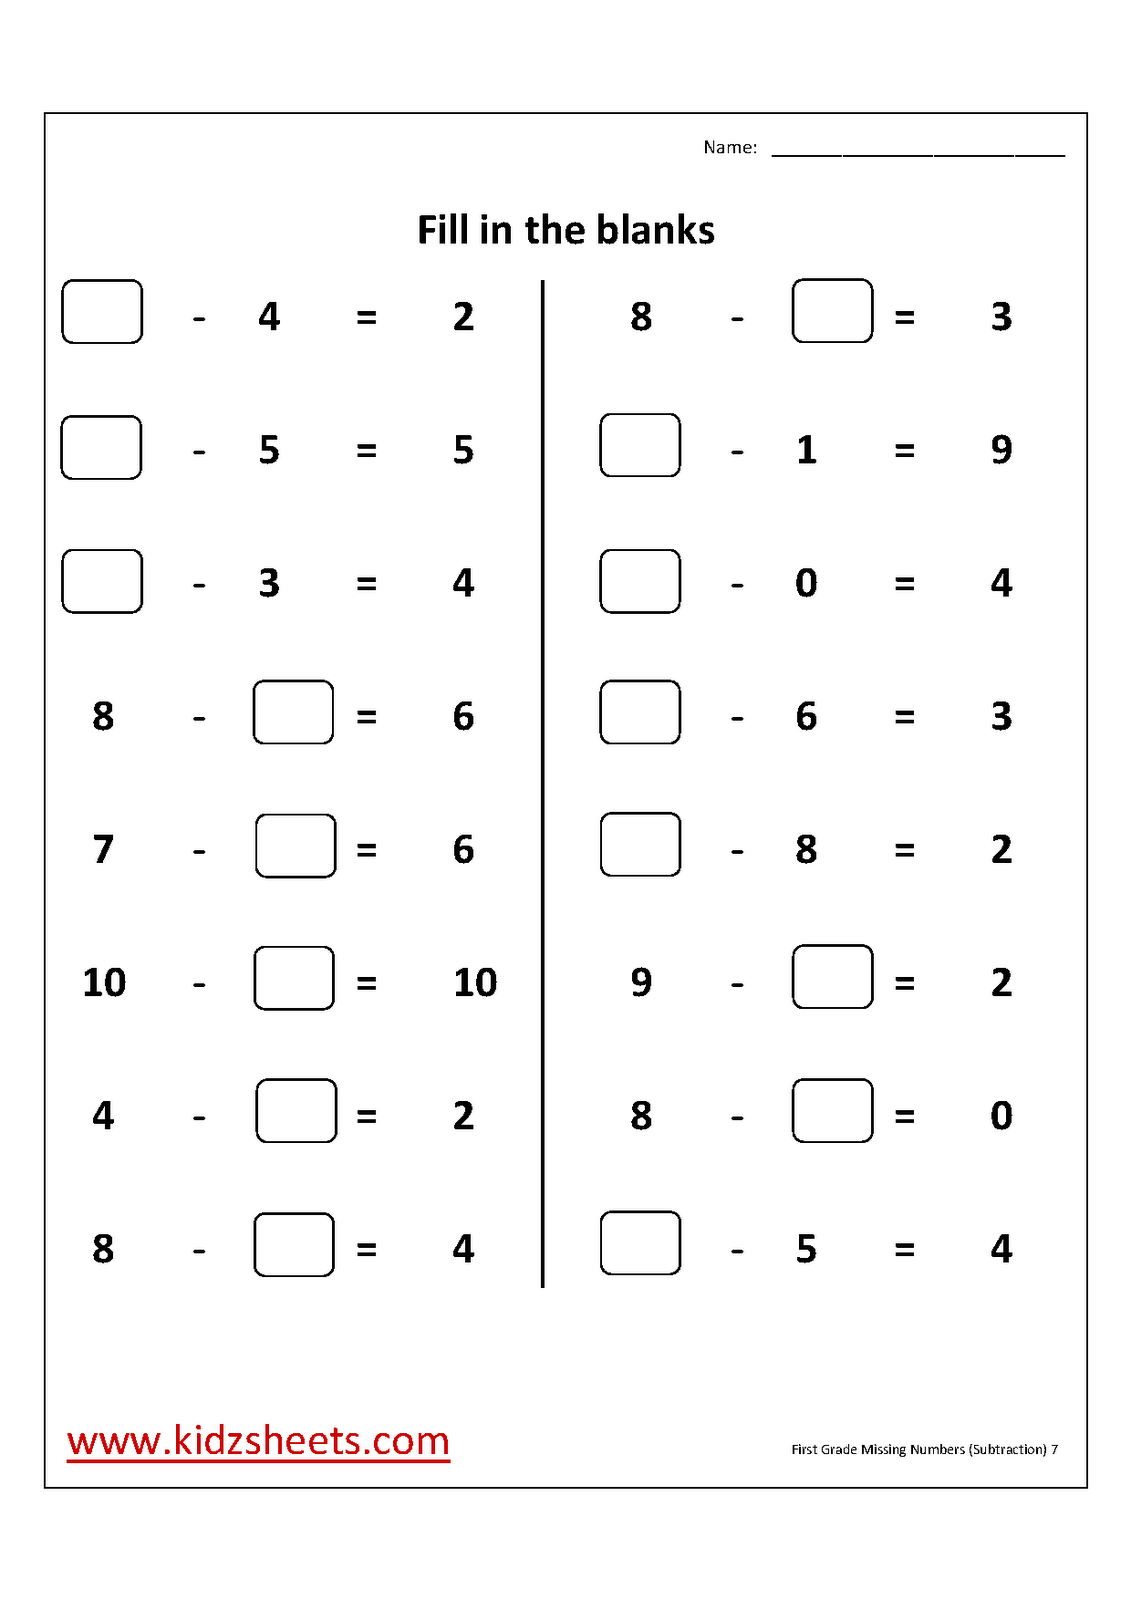 Subtraction in Missing numbers missing number worksheets Missing subtraction (Subtraction numbers  Worksheets,